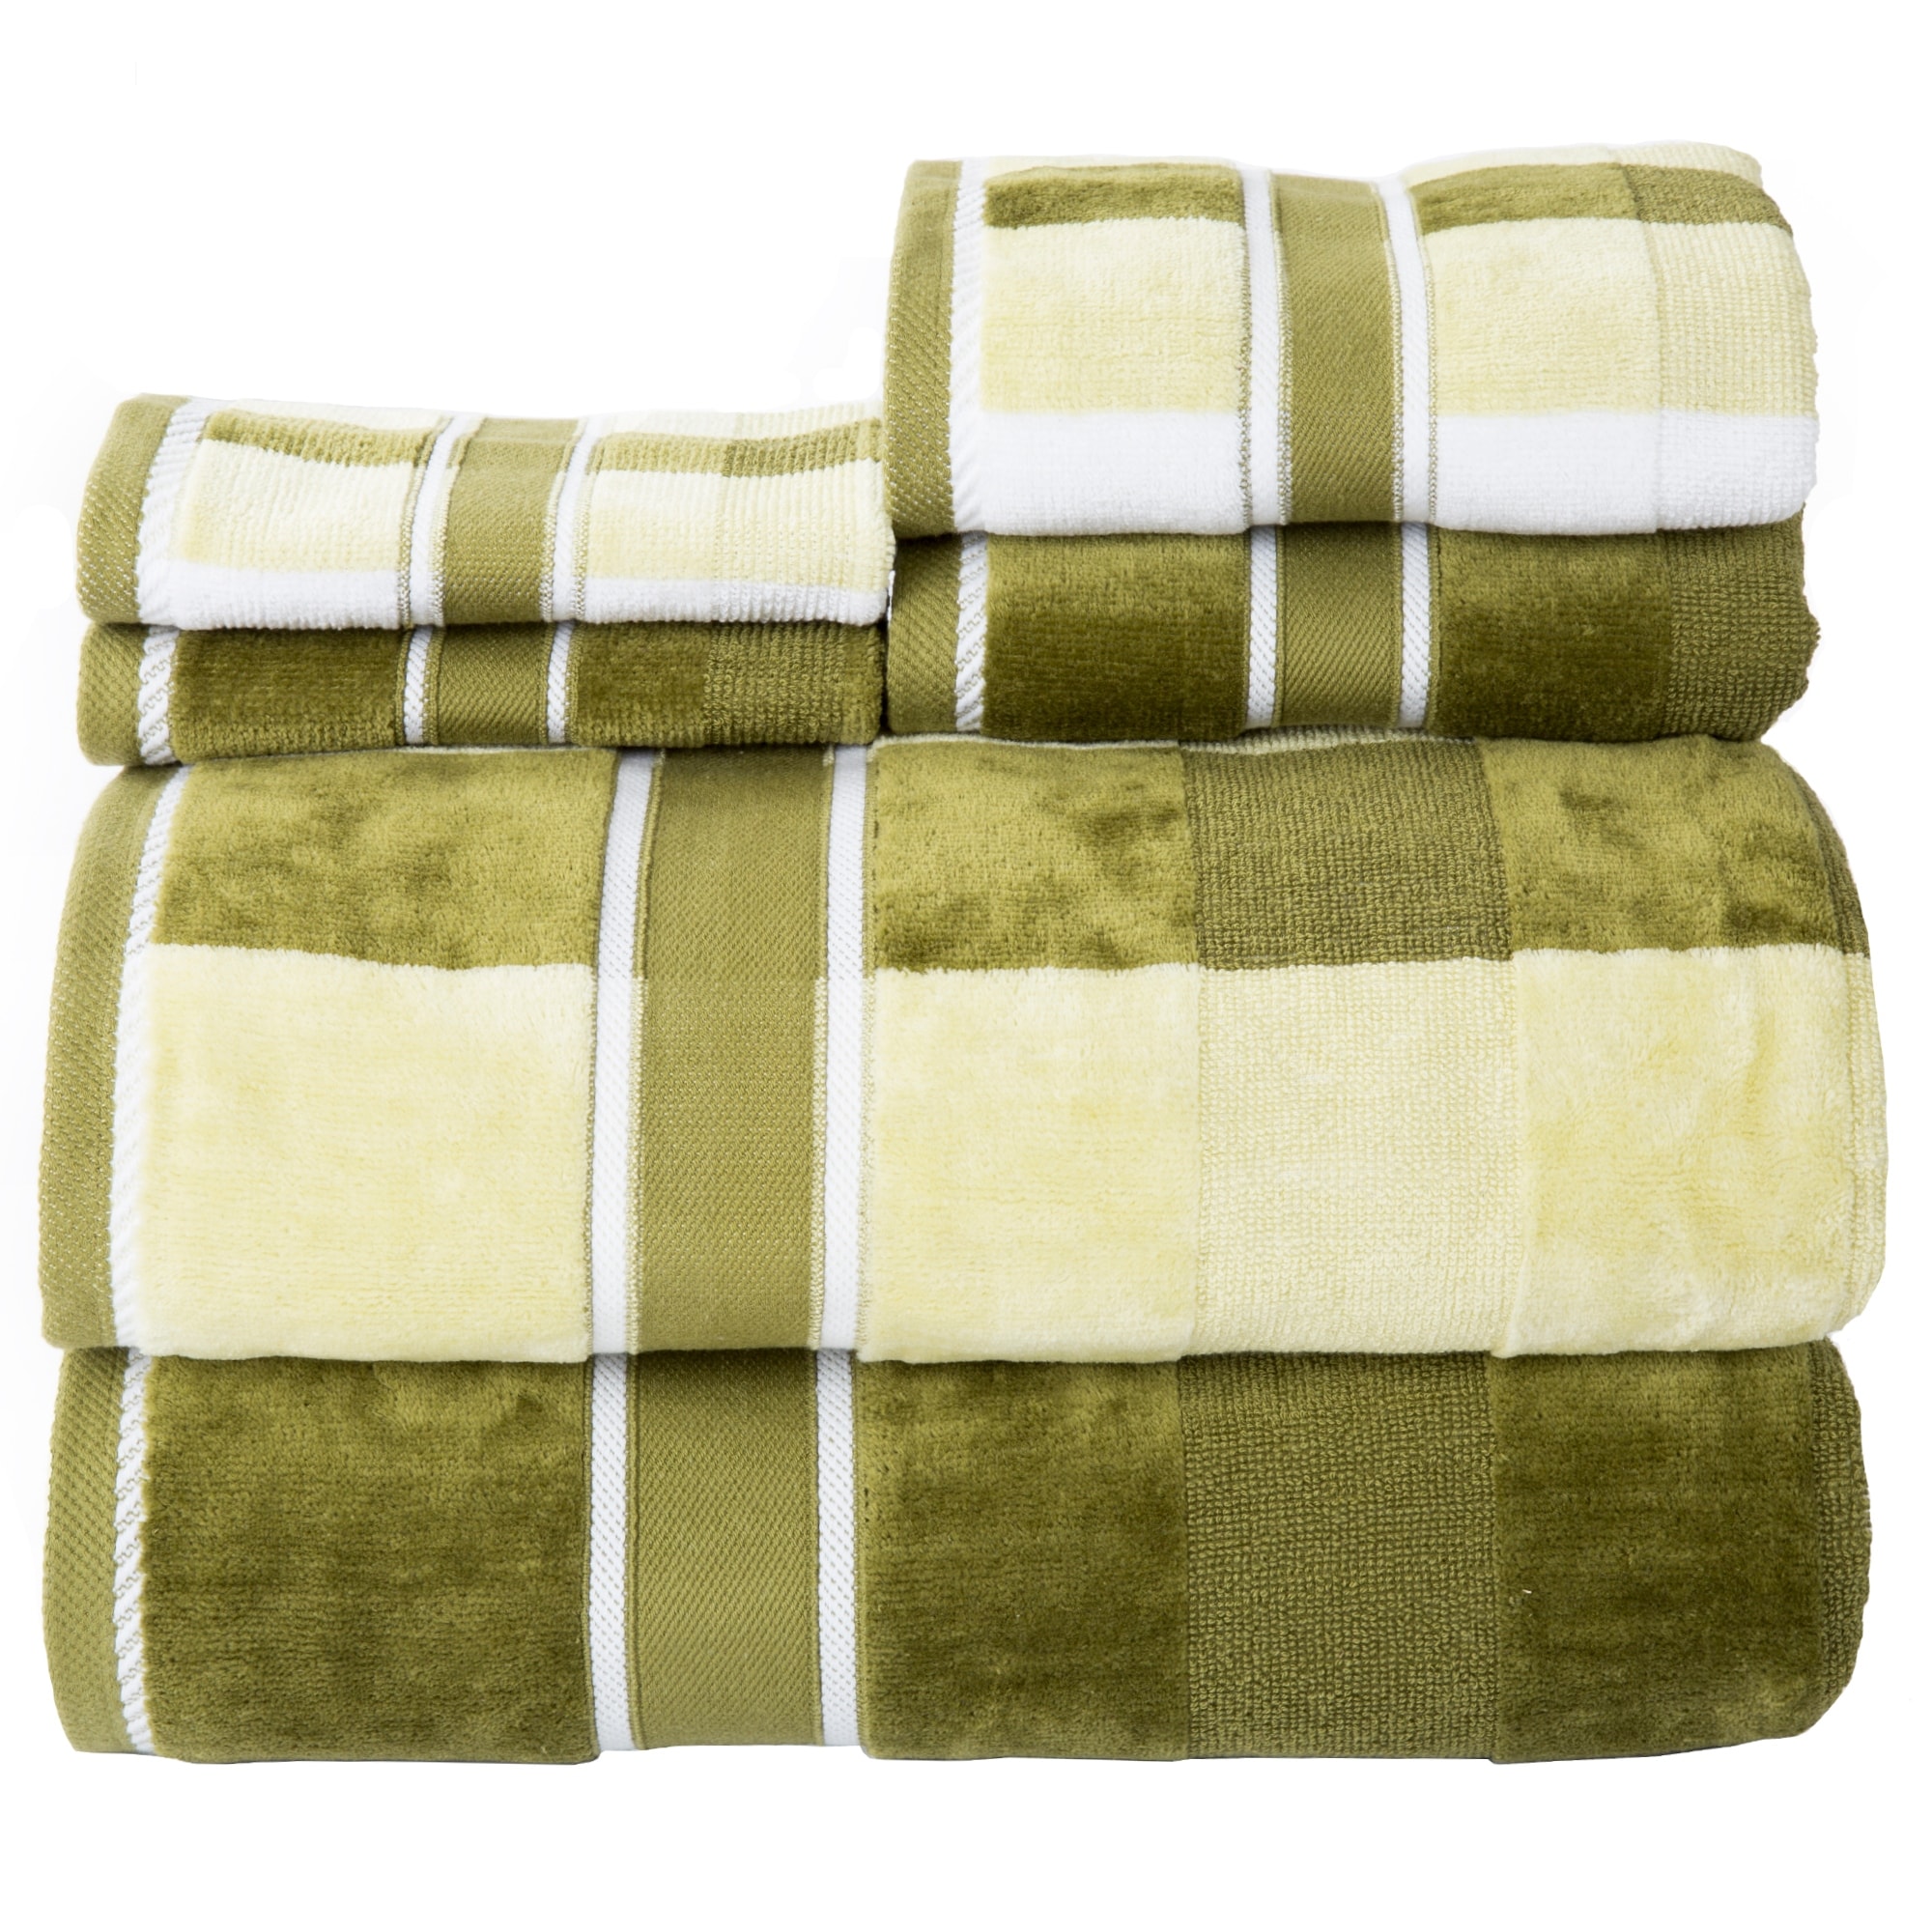 https://ak1.ostkcdn.com/images/products/is/images/direct/0e20ea2088e1d5c50f0246e6db0dacfd66beac6b/6PC-Towel-Set---Absorbent-Cotton-Bathroom-Accessories-Solid-and-Striped-Towels-by-Windsor-Home.jpg